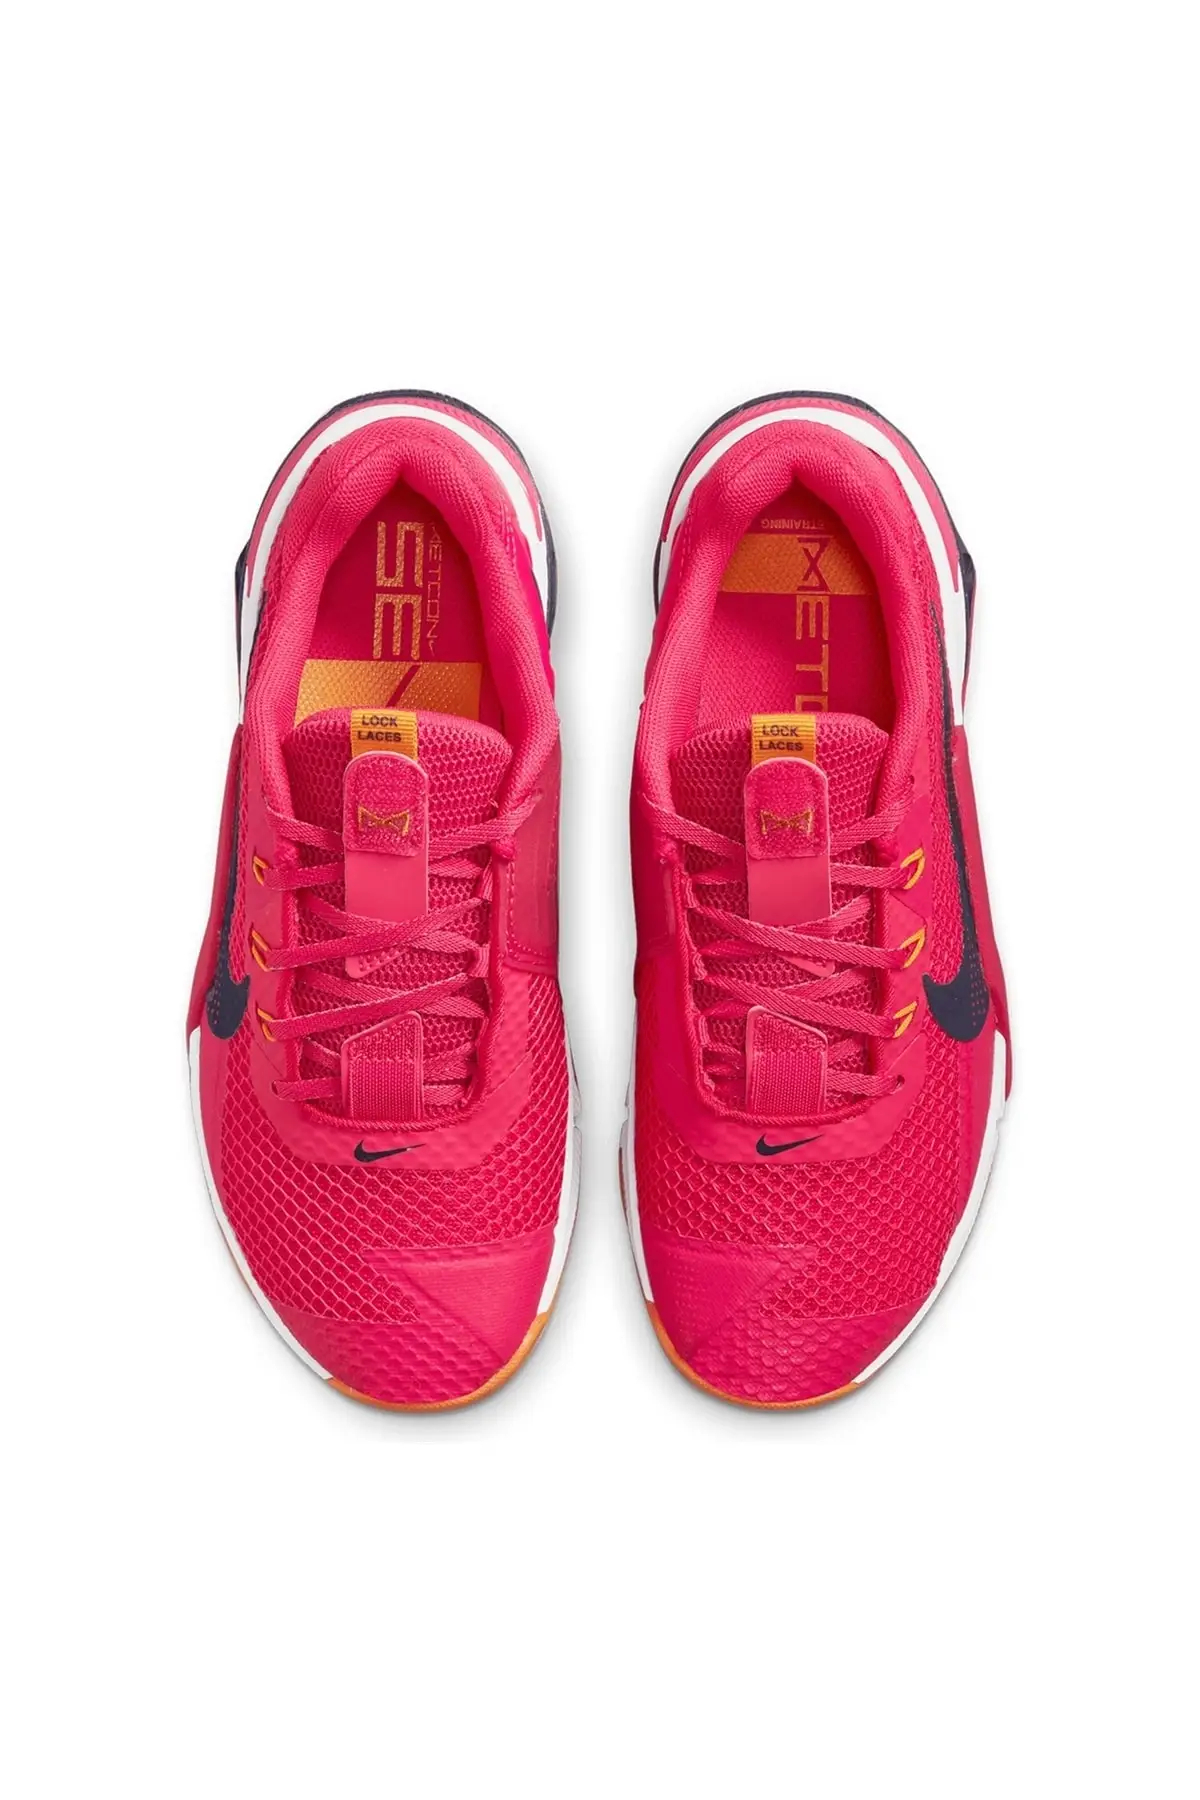 The allure of pink nike shoes women’s插图3